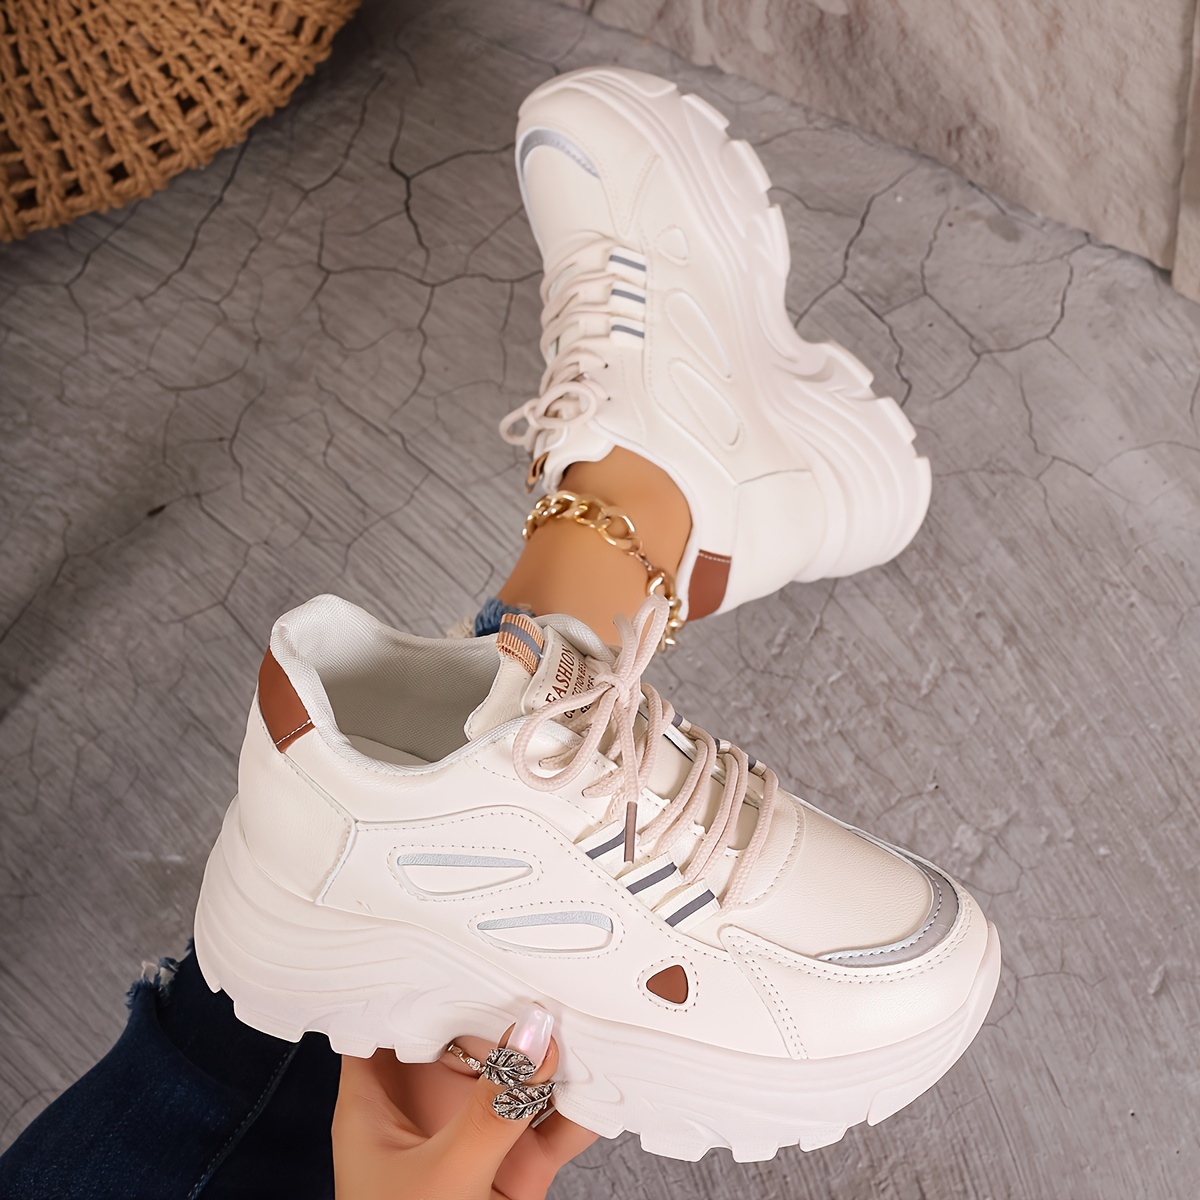 

Women's Trendy Platform Sneakers, Causal Lace Up Outdoor Shoes, Comfortable Low Top Sport Shoes